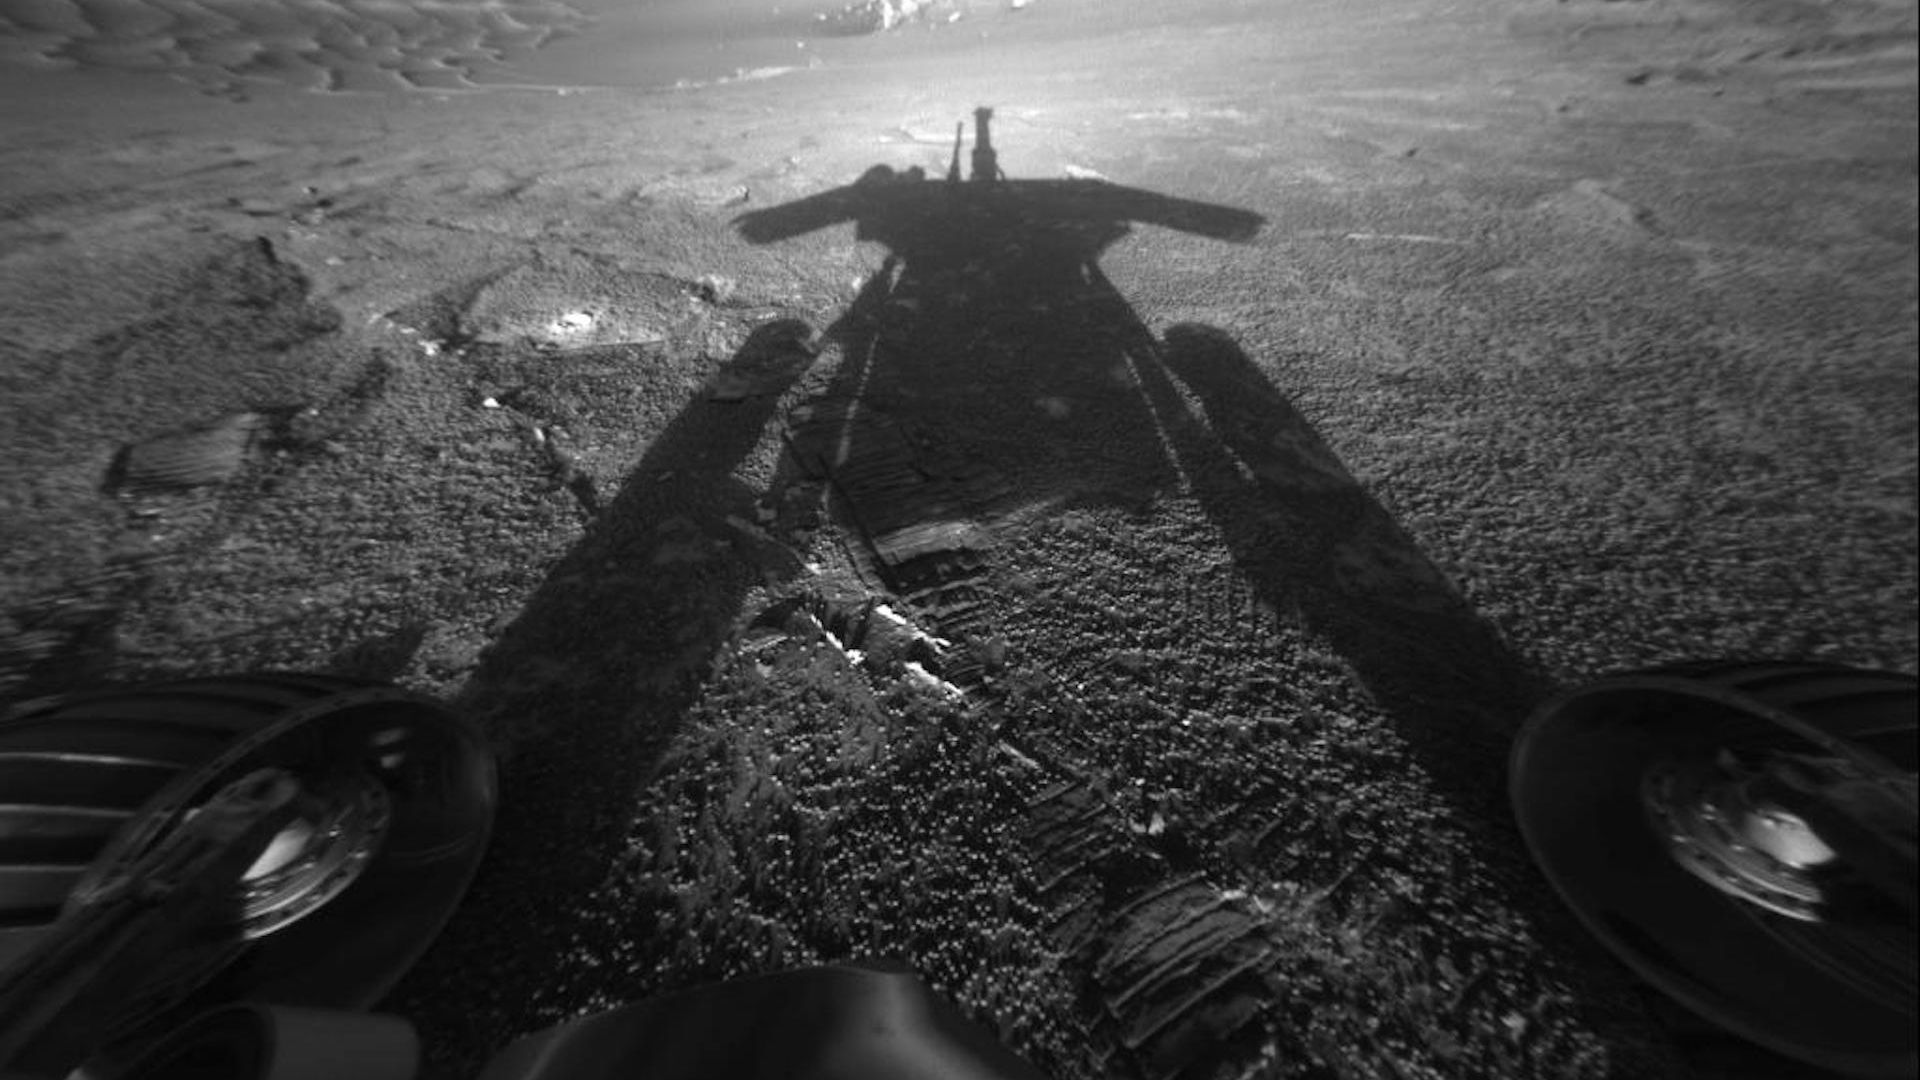 A long shadow cast on Mars by NASA's Opportunity rover.